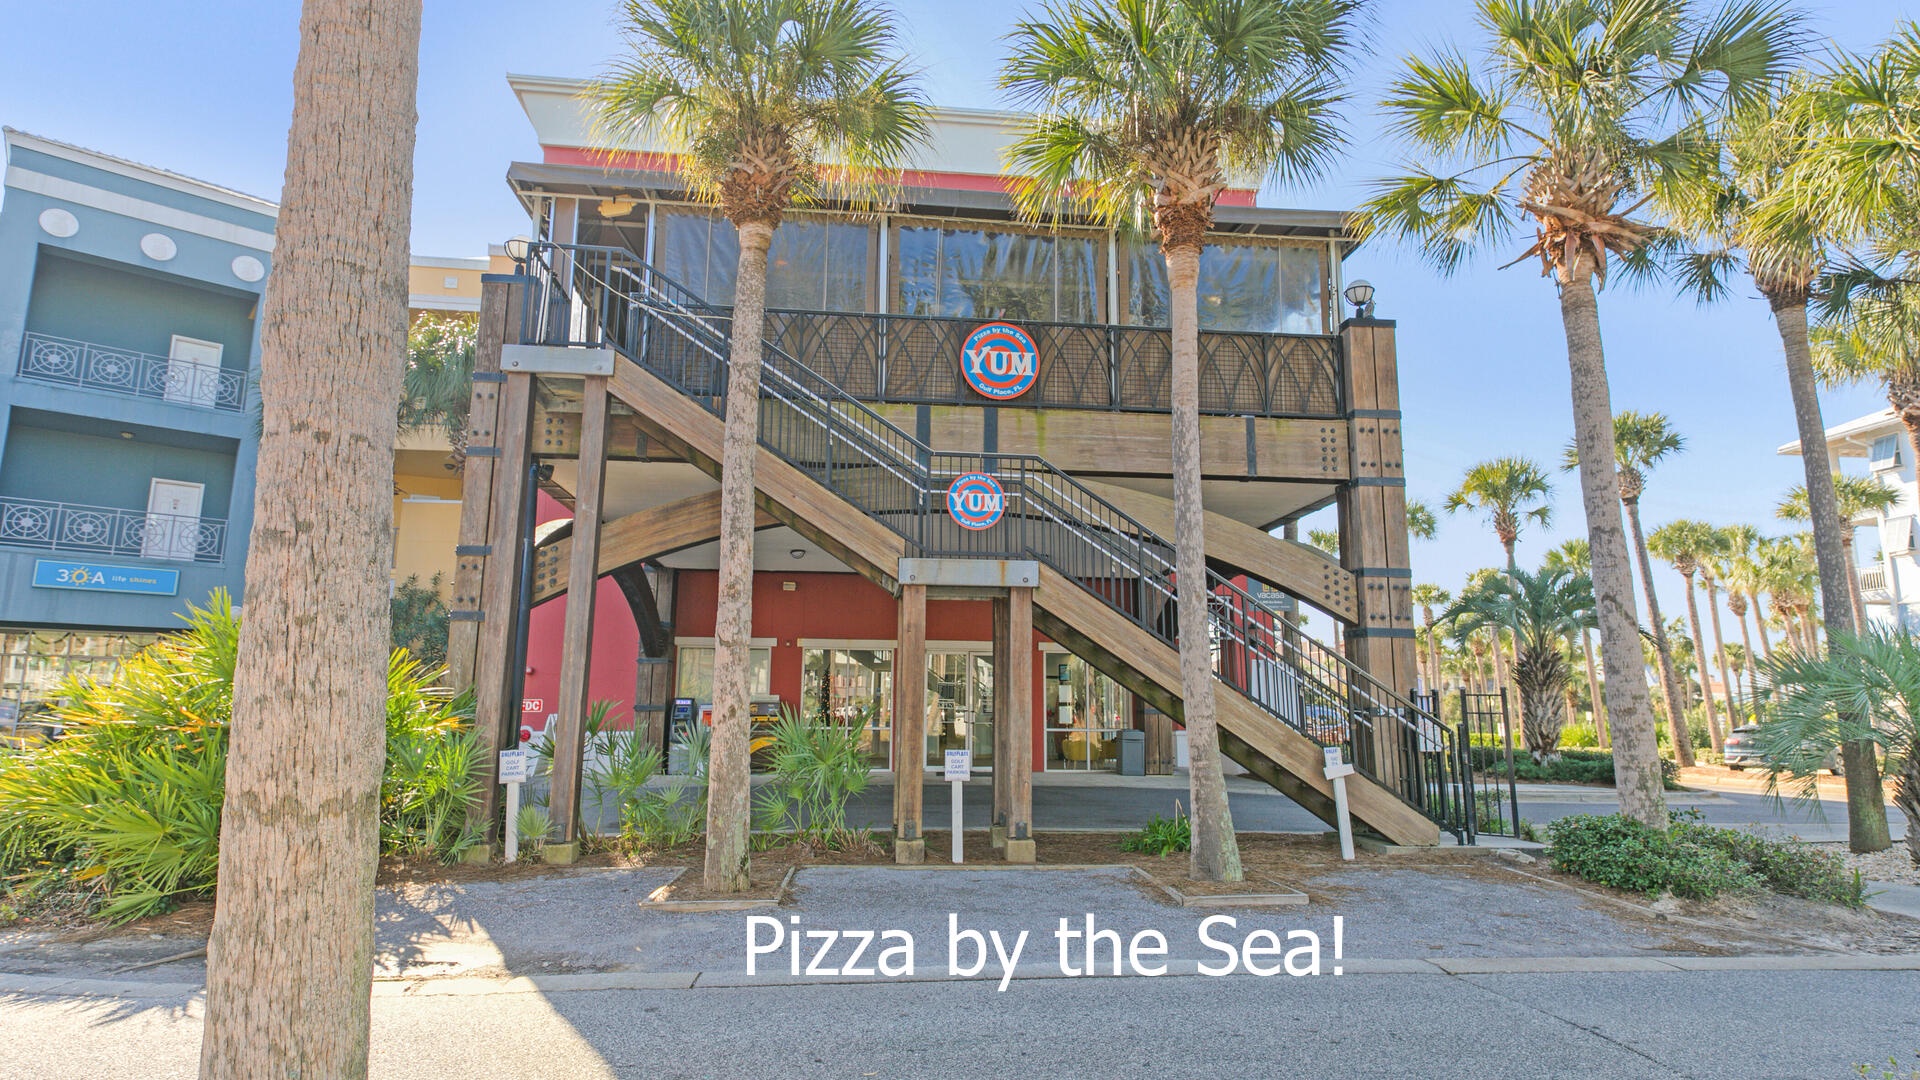 Shopping, dining and activities at nearby Gulf Place!